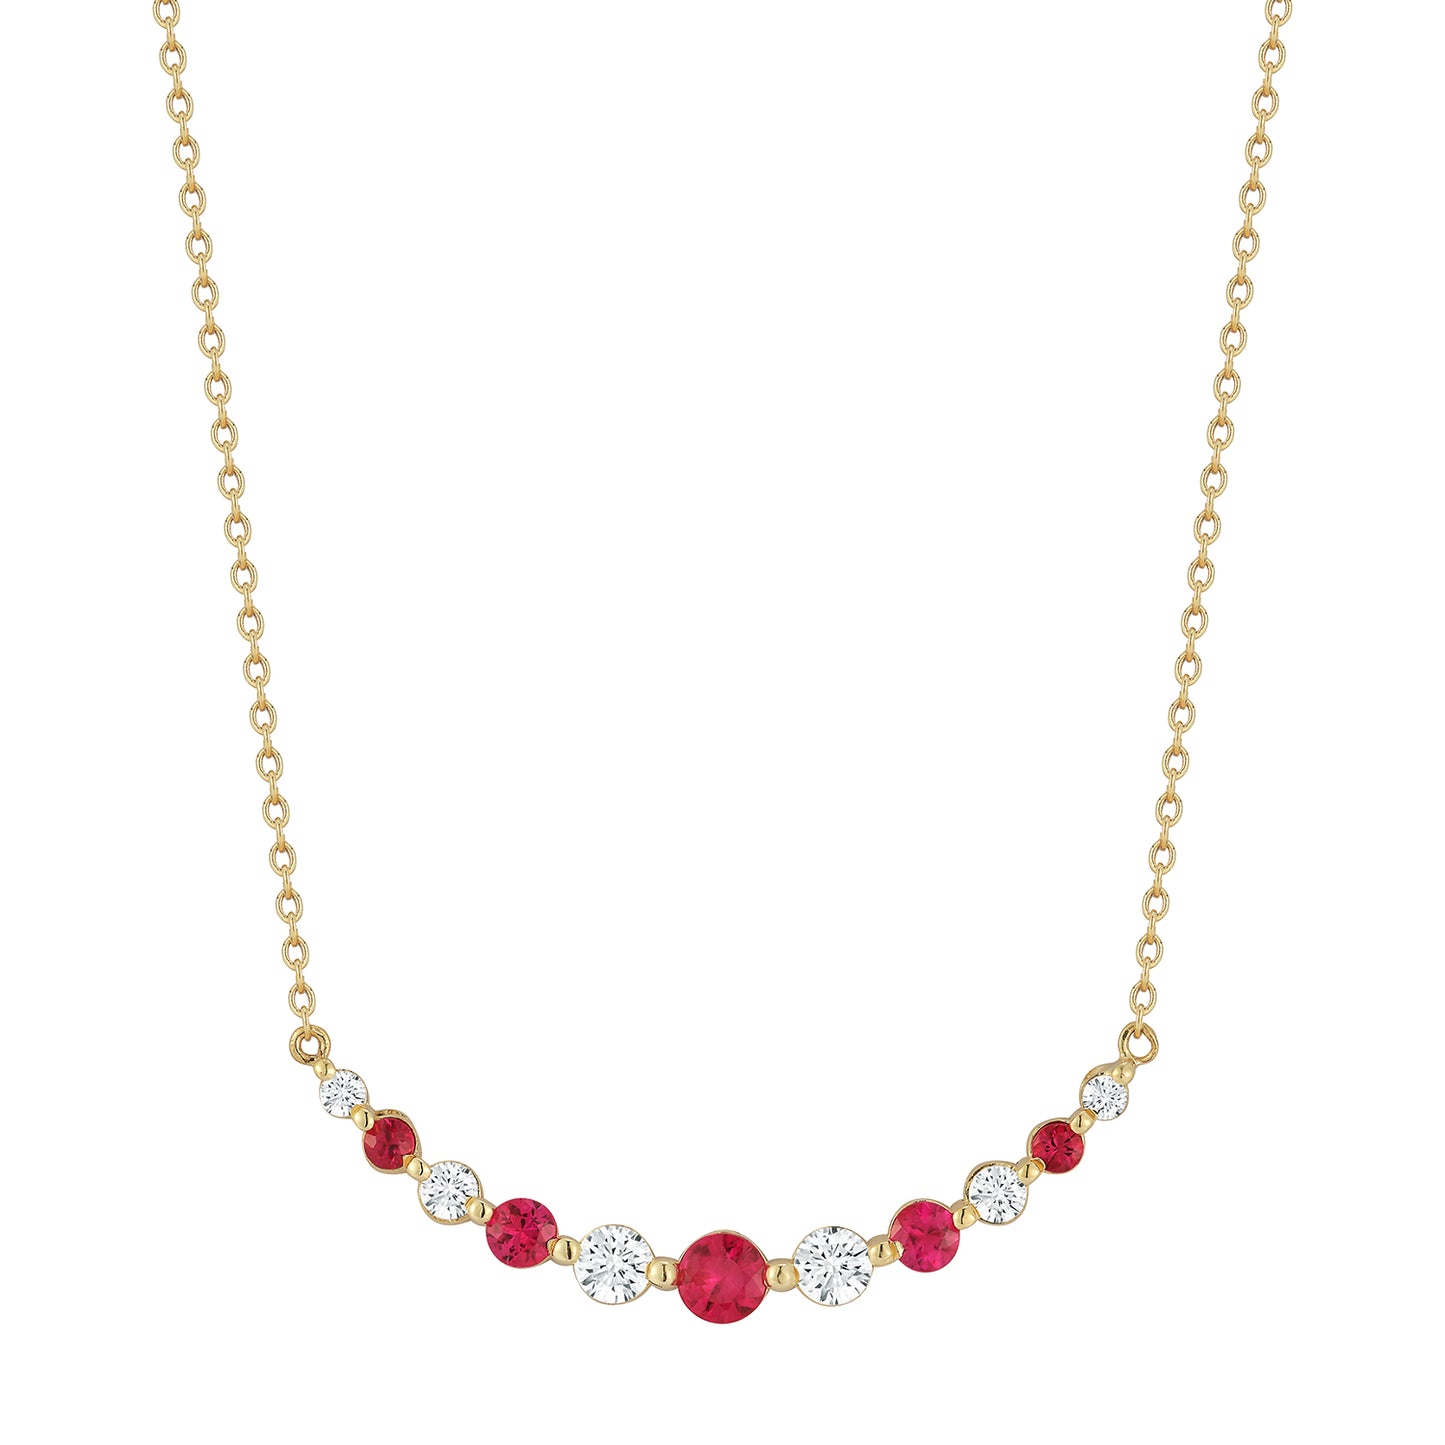 Diamond and Ruby Fashion Necklace